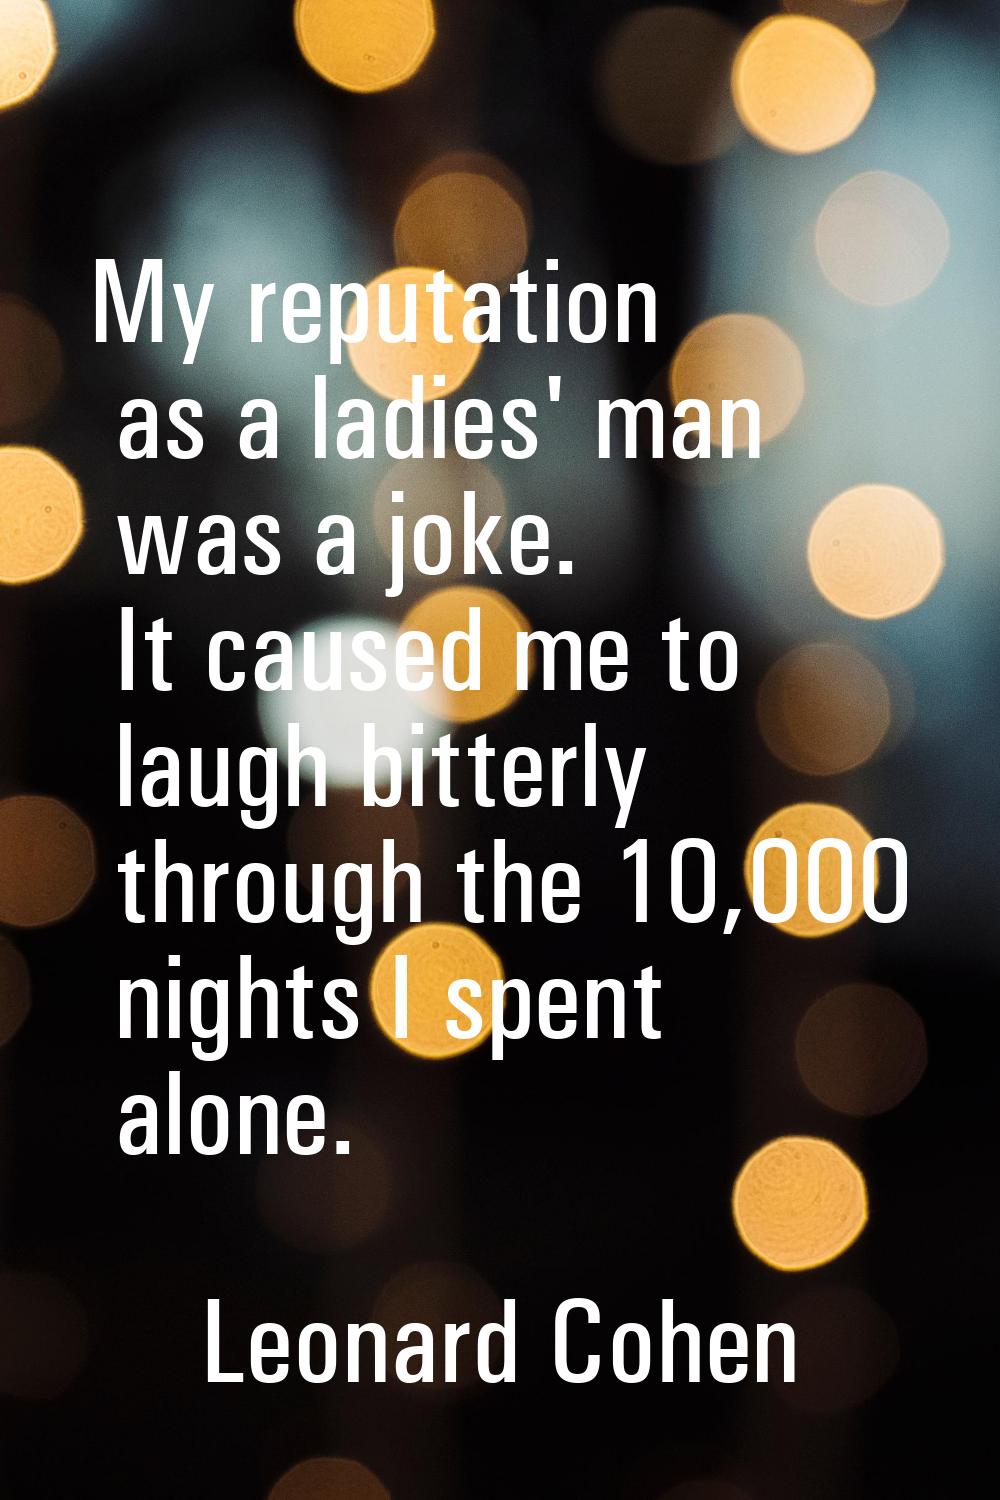 My reputation as a ladies' man was a joke. It caused me to laugh bitterly through the 10,000 nights